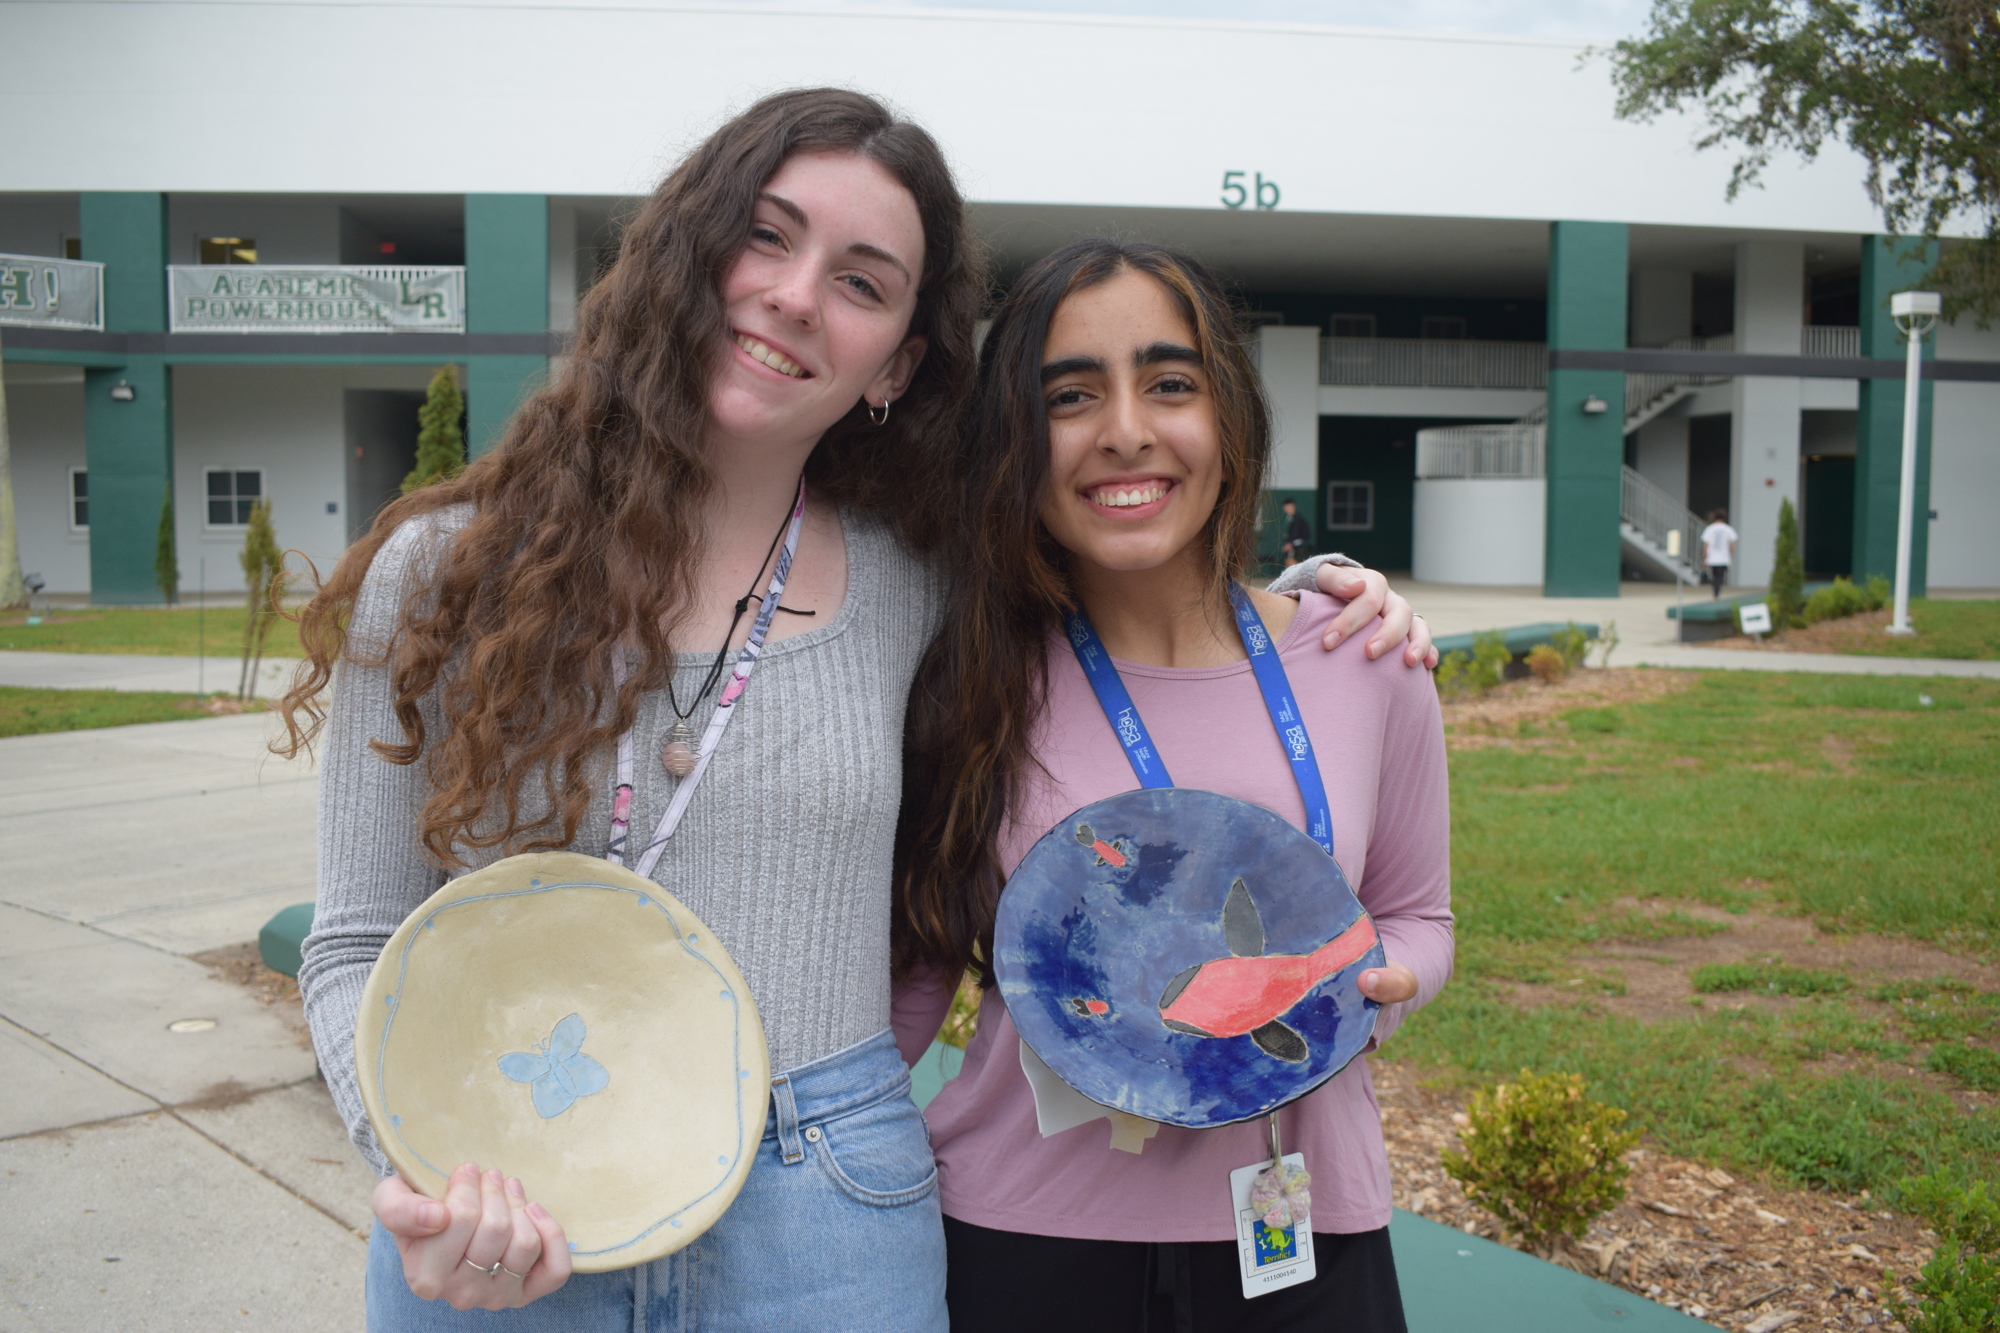 Sophomores Ainsley Owens and Ramzia Sorathia say they love being able to put their personal touch on the bowls they sold or donated to raise money for Meals on Wheels Plus of Manatee.